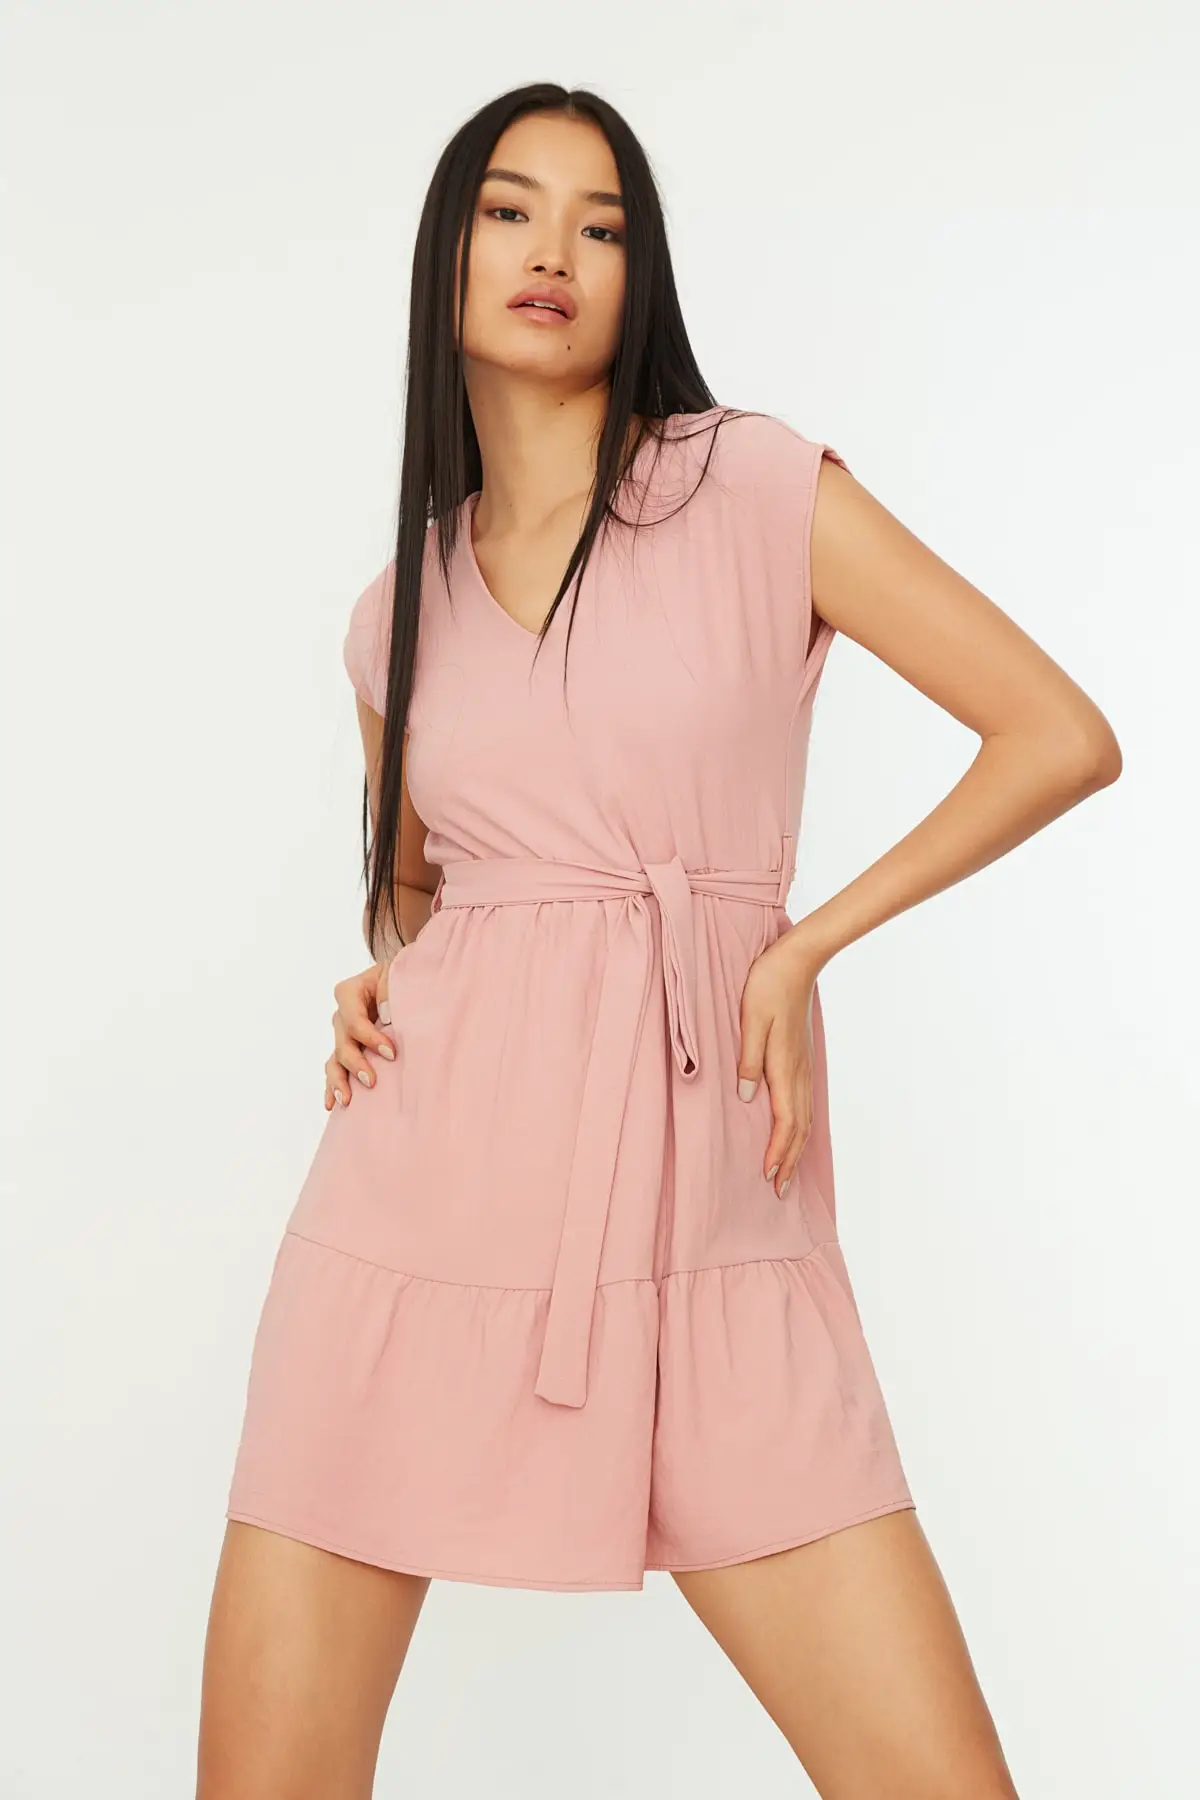 

Rose dried belted dress TWOSS20EL0628 Shift short pink Casual plain woven V neck Mini Polyester aerobic standard sleeve